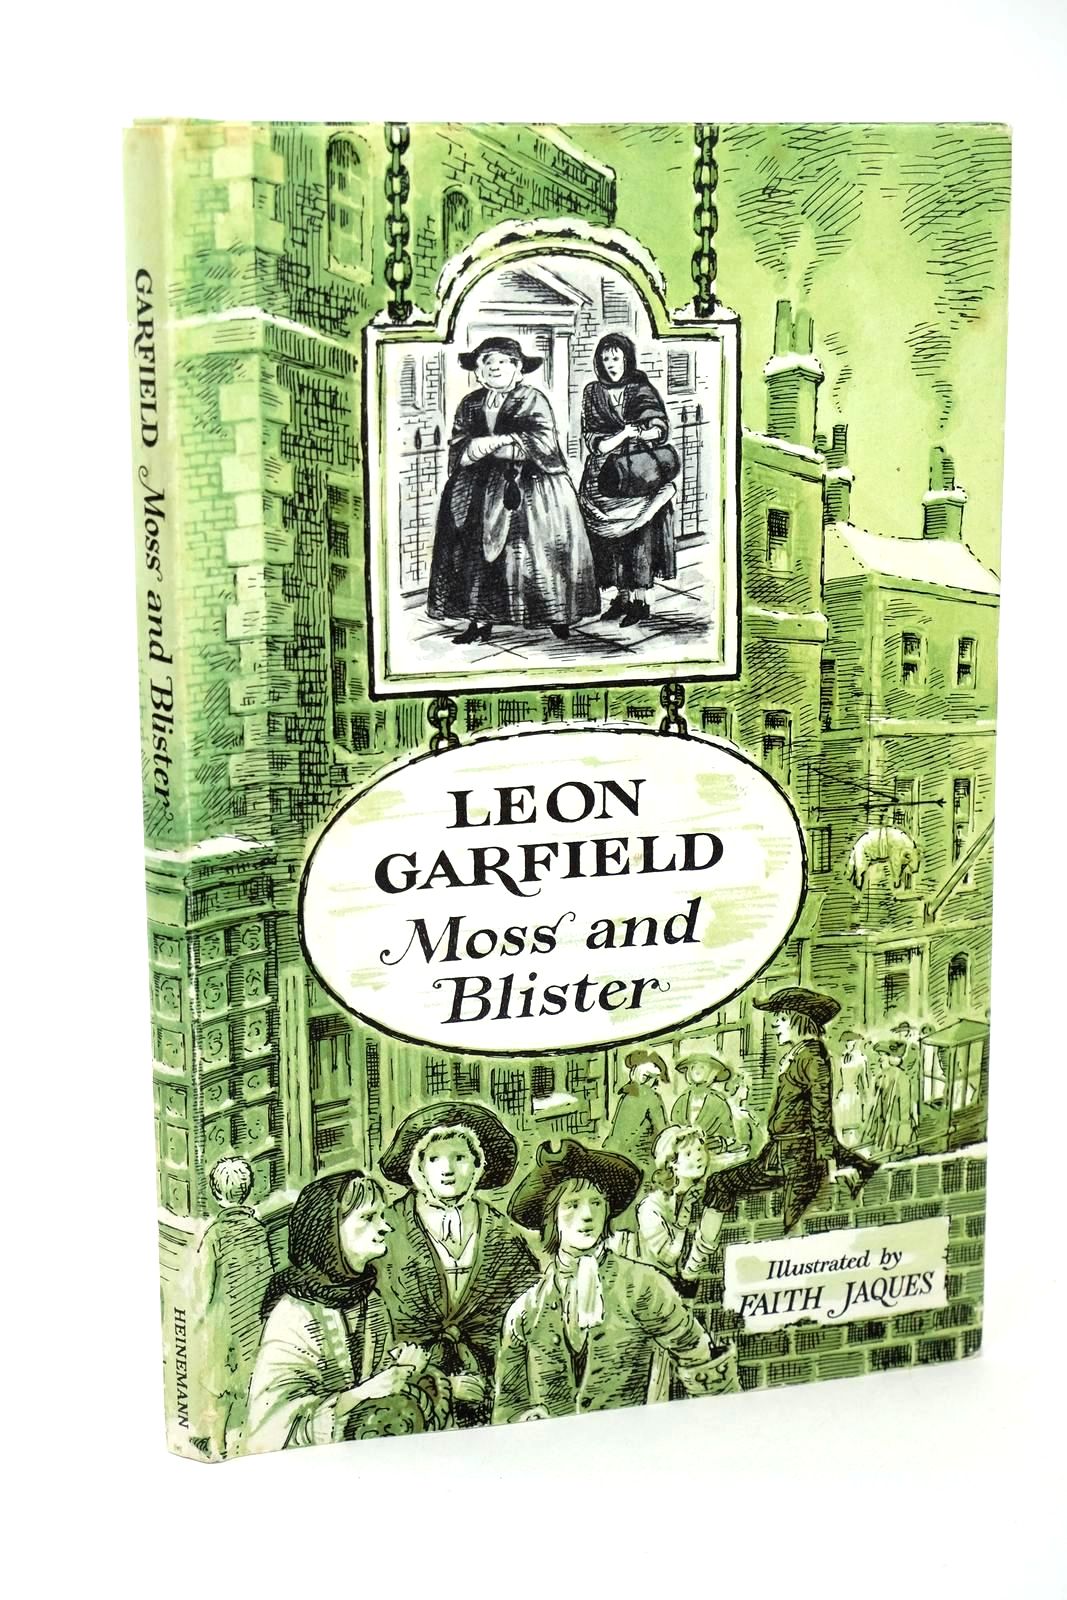 Photo of MOSS AND BLISTER written by Garfield, Leon illustrated by Jaques, Faith published by Heinemann (STOCK CODE: 1318526)  for sale by Stella & Rose's Books